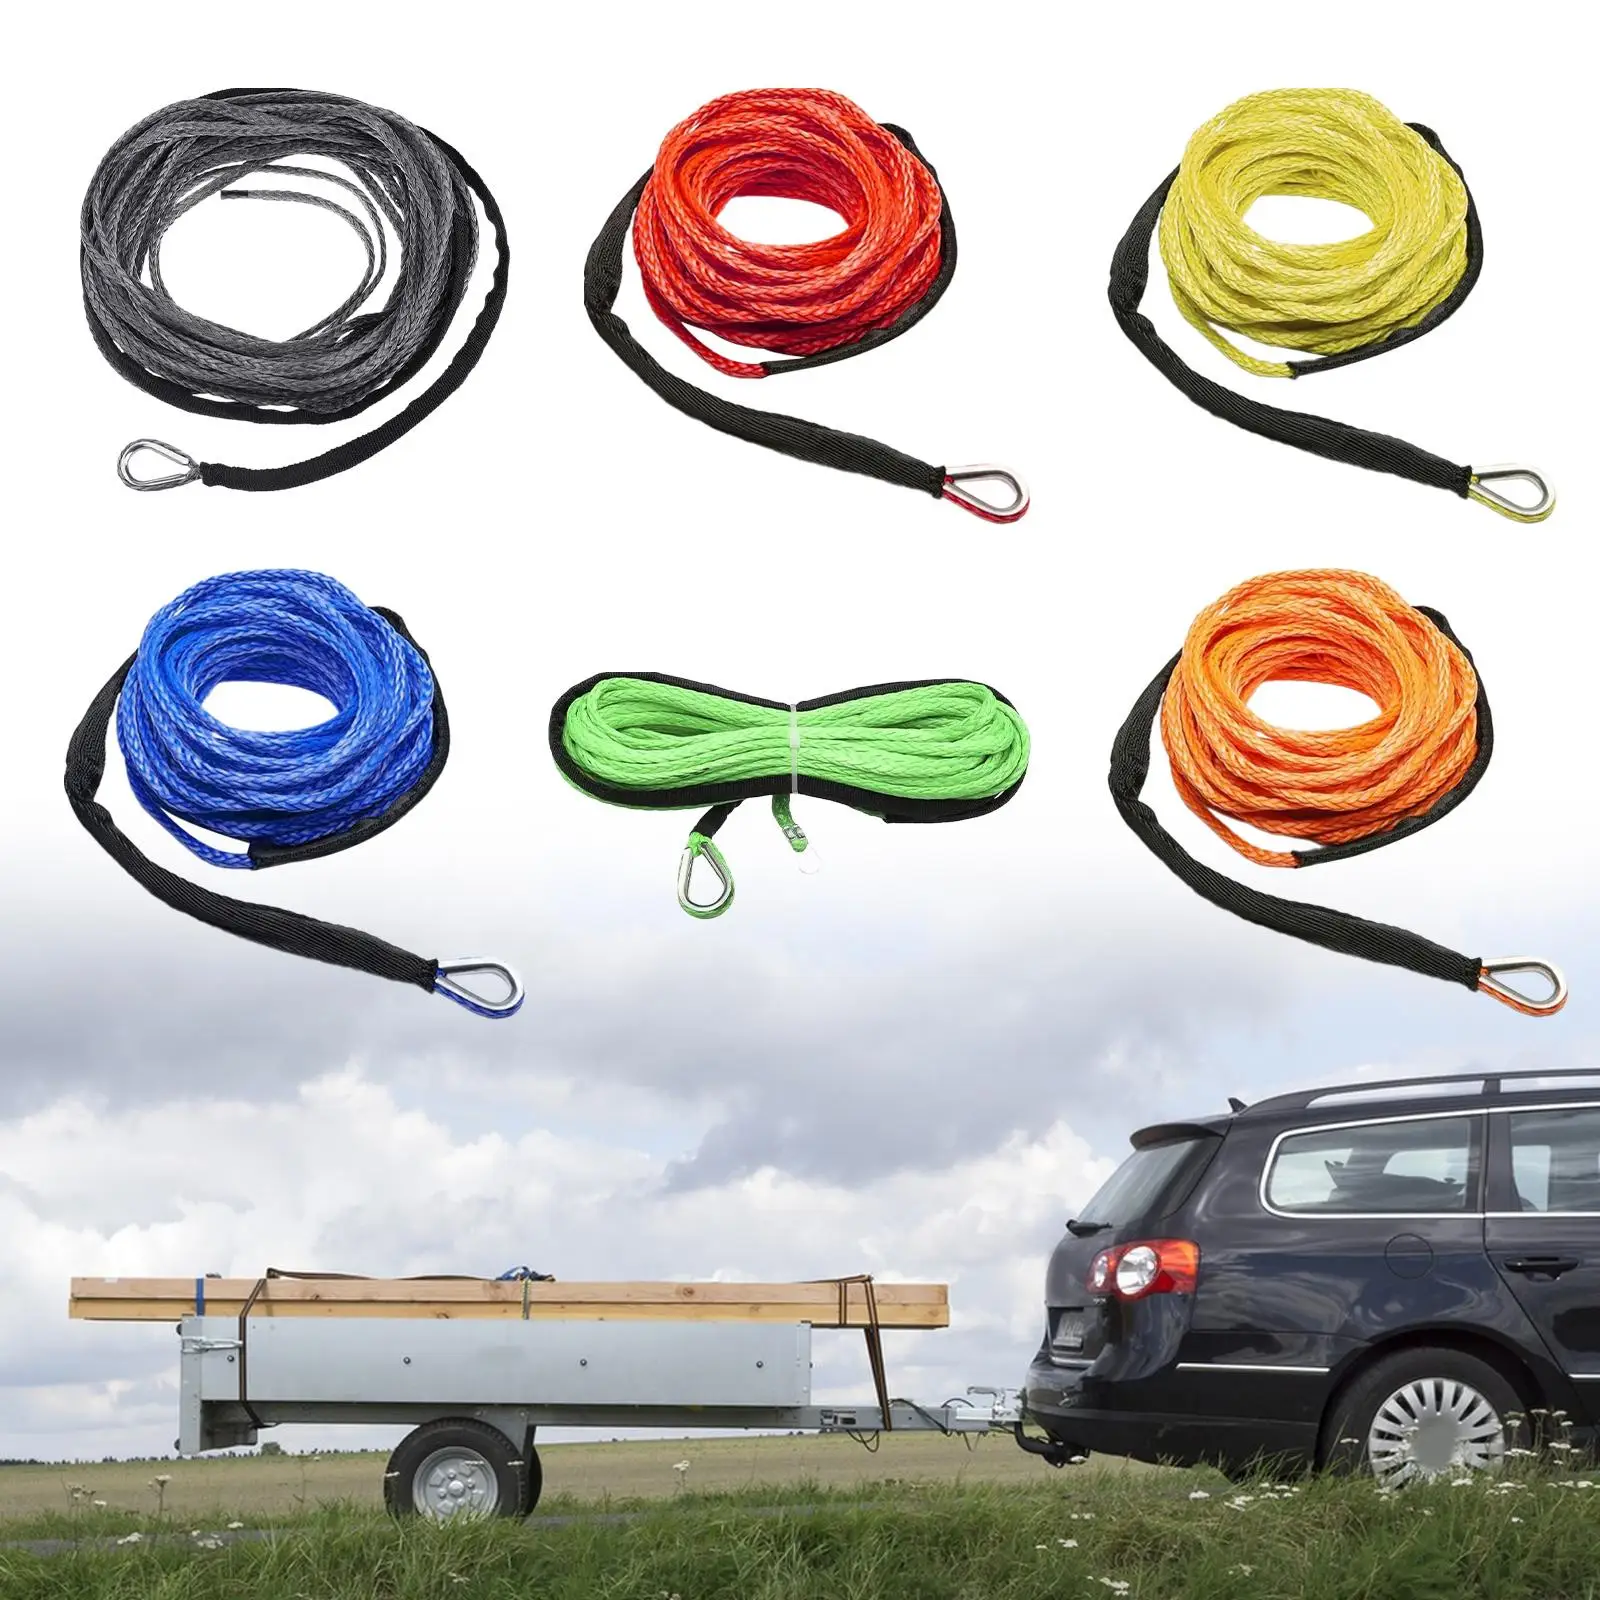 Tow Rope 15M with Sheath 7700lbs Synthetic Winch Rope for Boat SUV Car